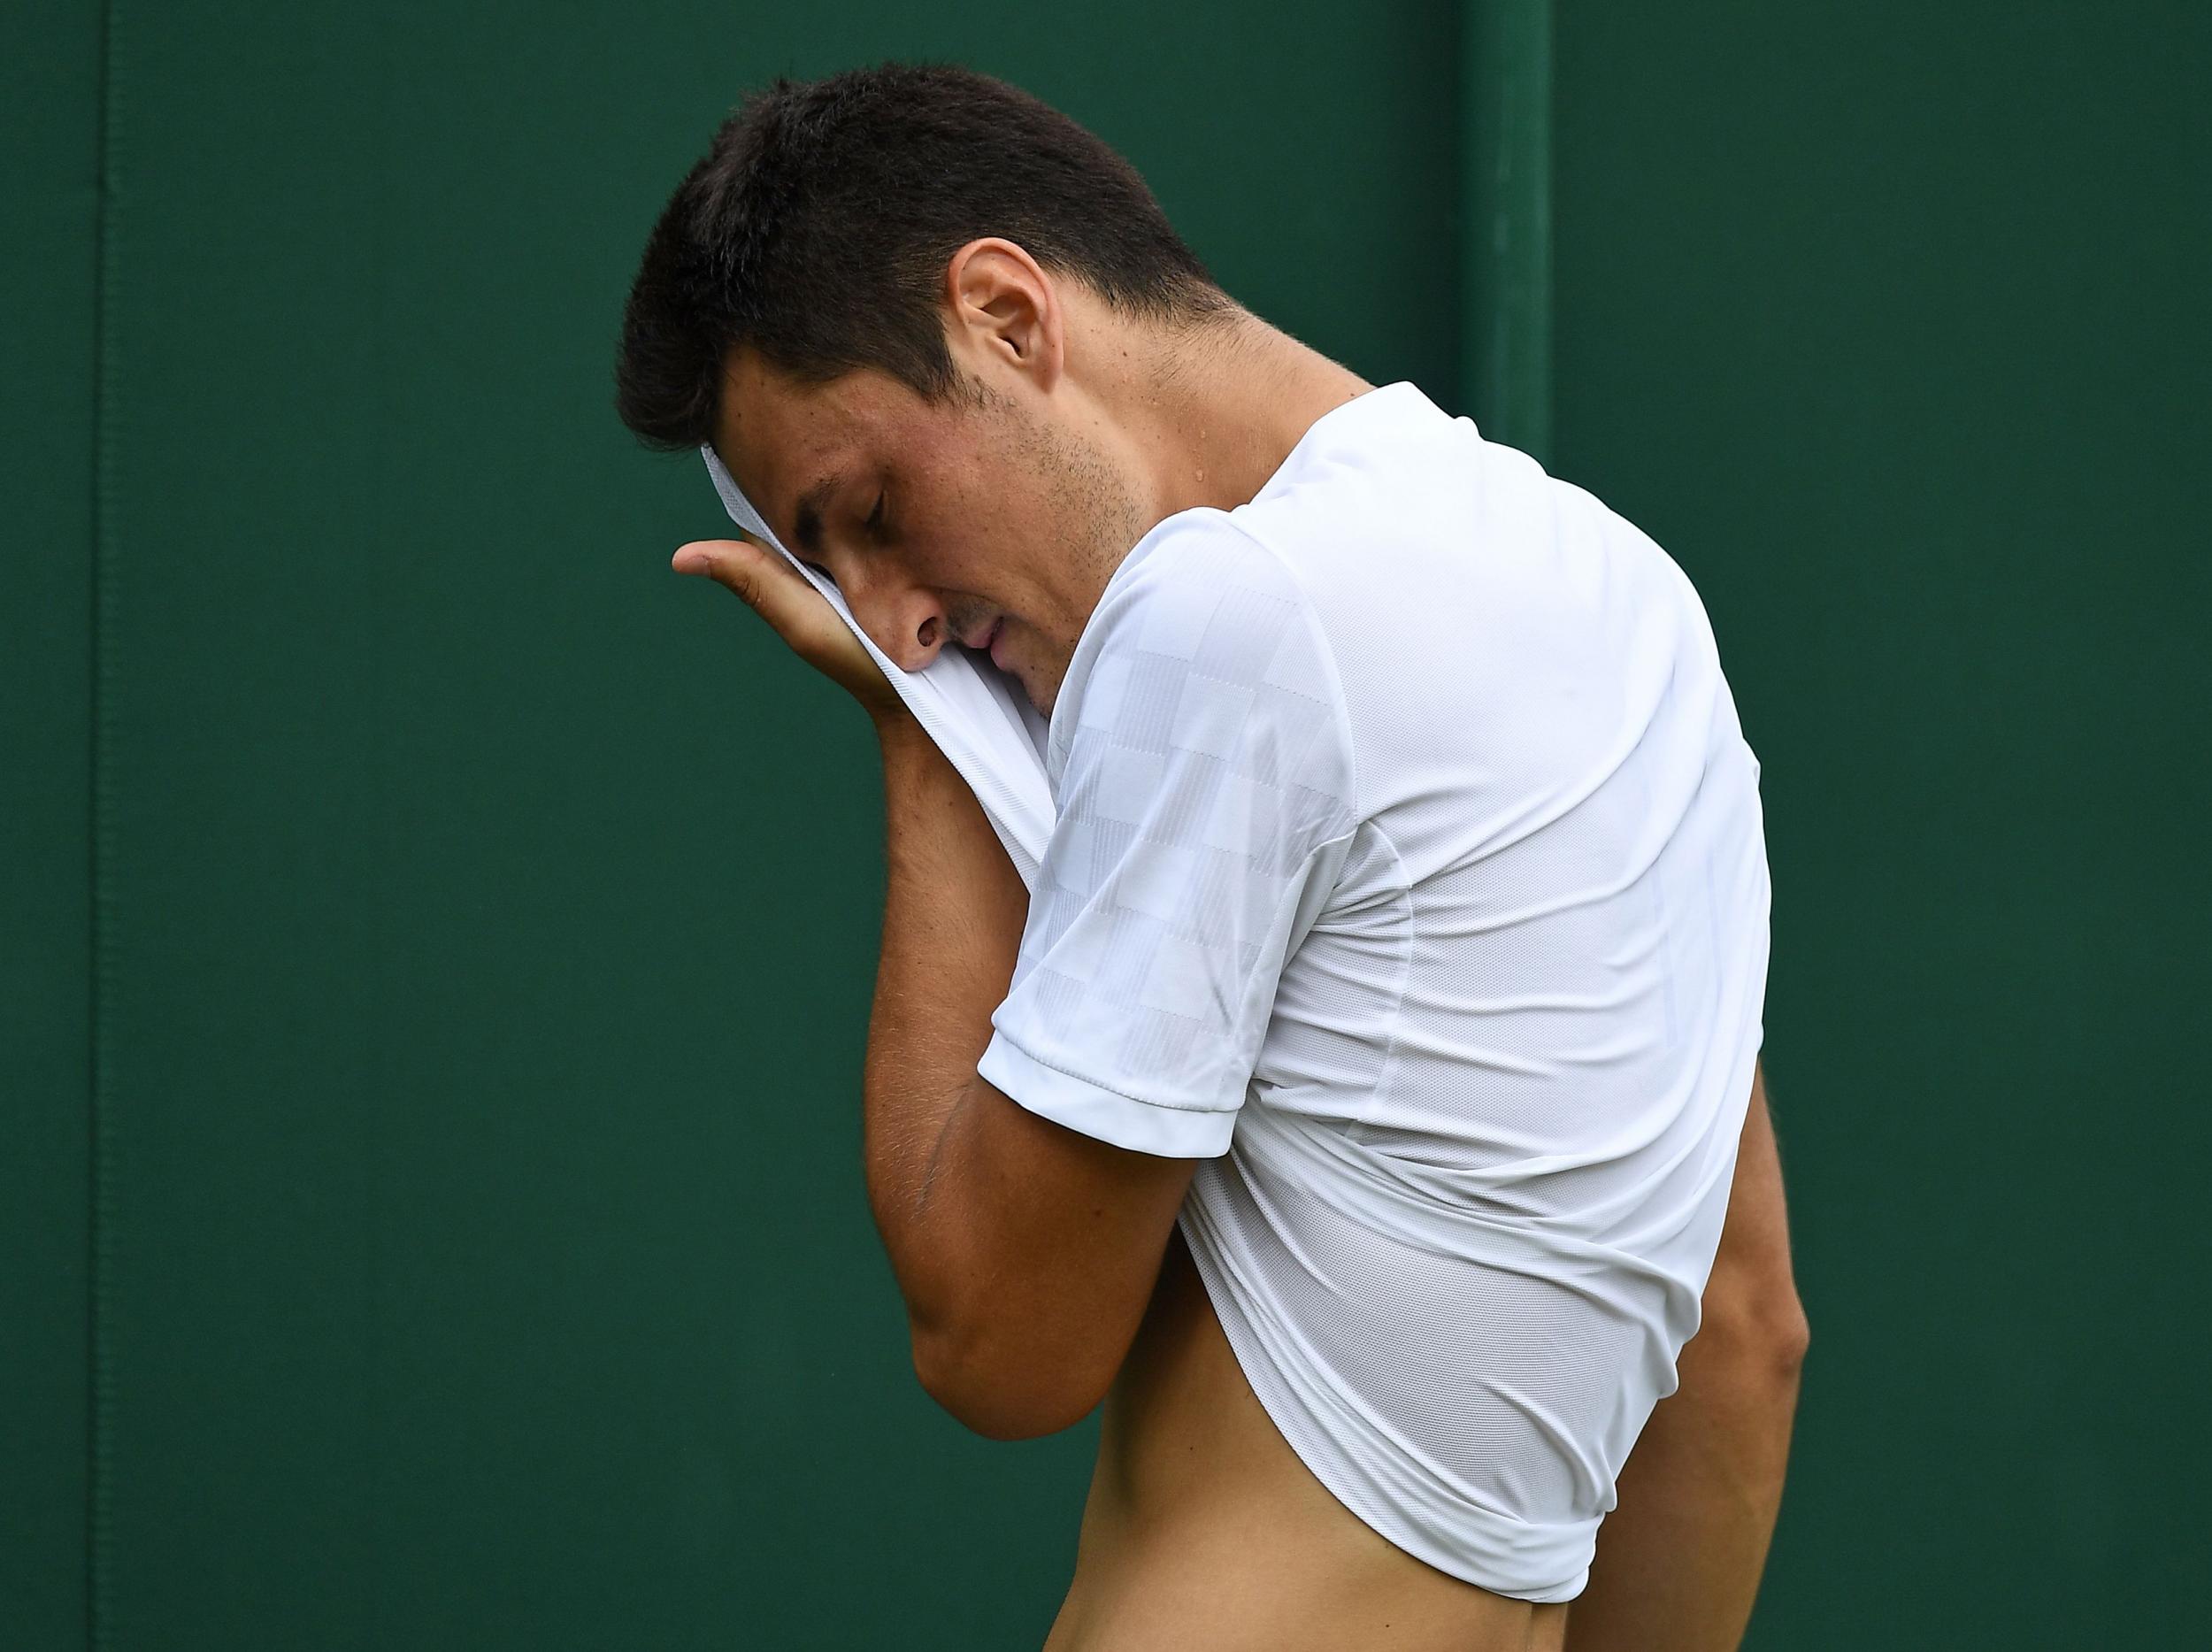 Tomic crashed out of Wimbledon in the first round